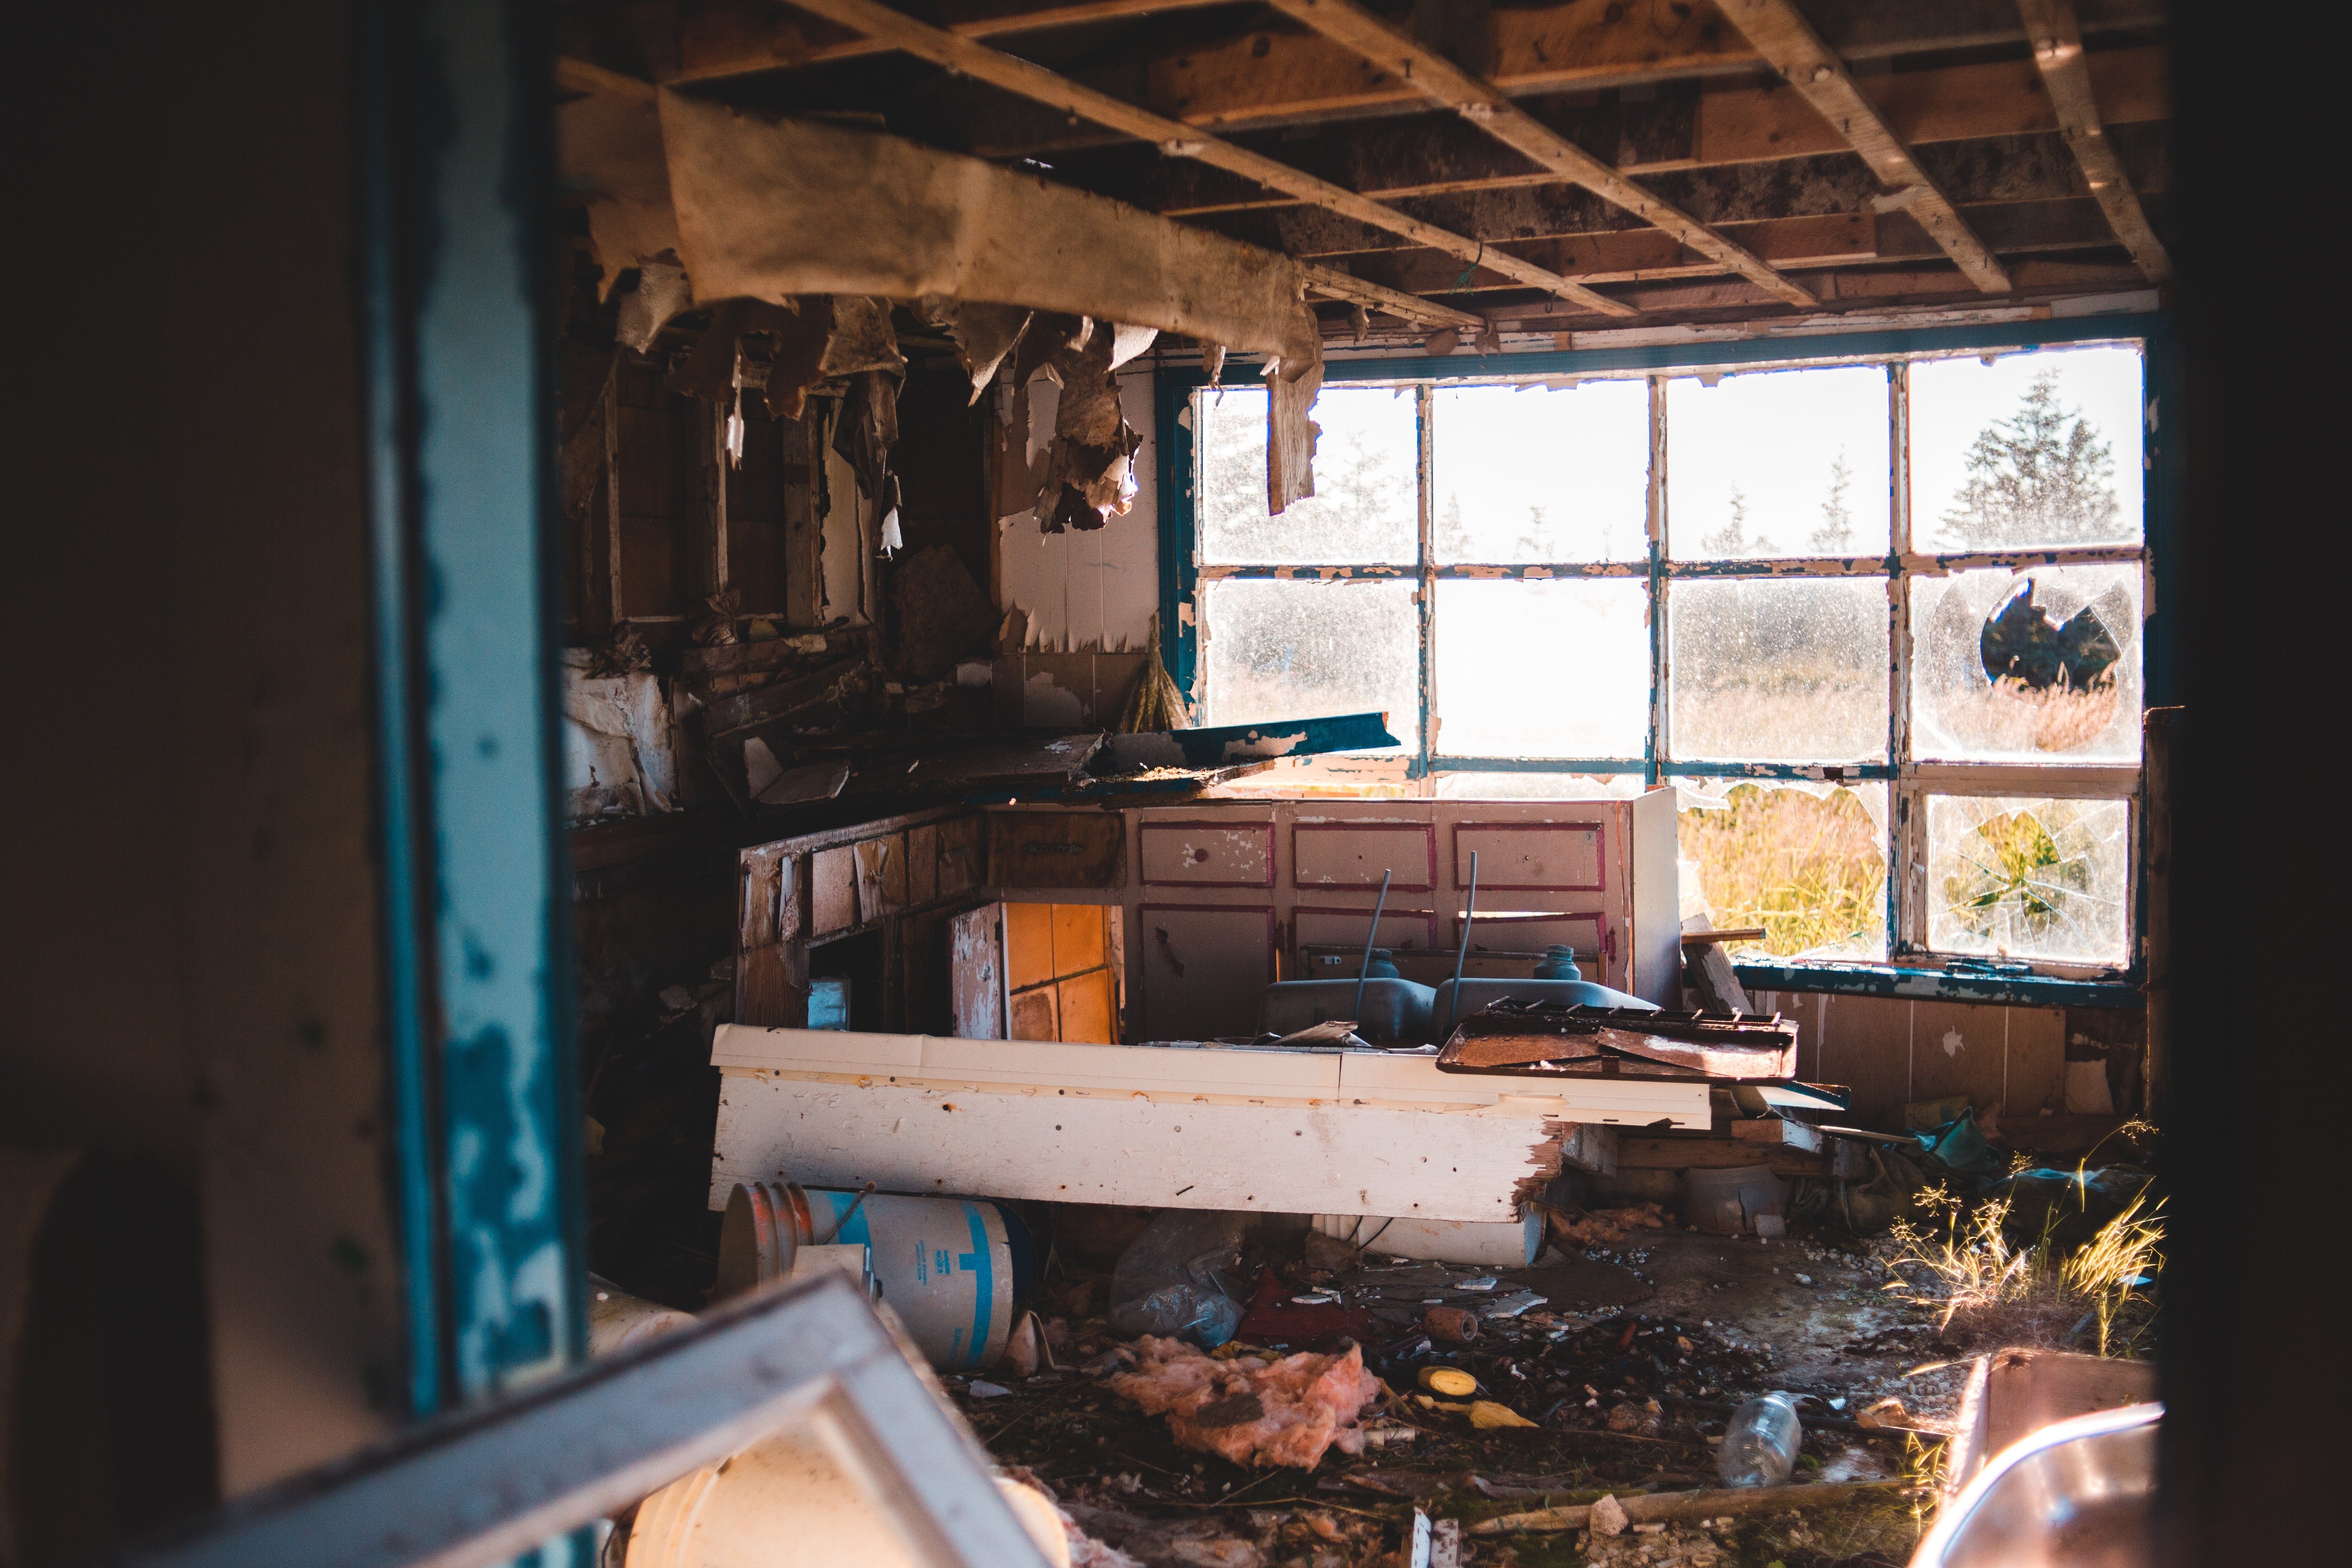 The house was in a terrible state | Photo: Pexels